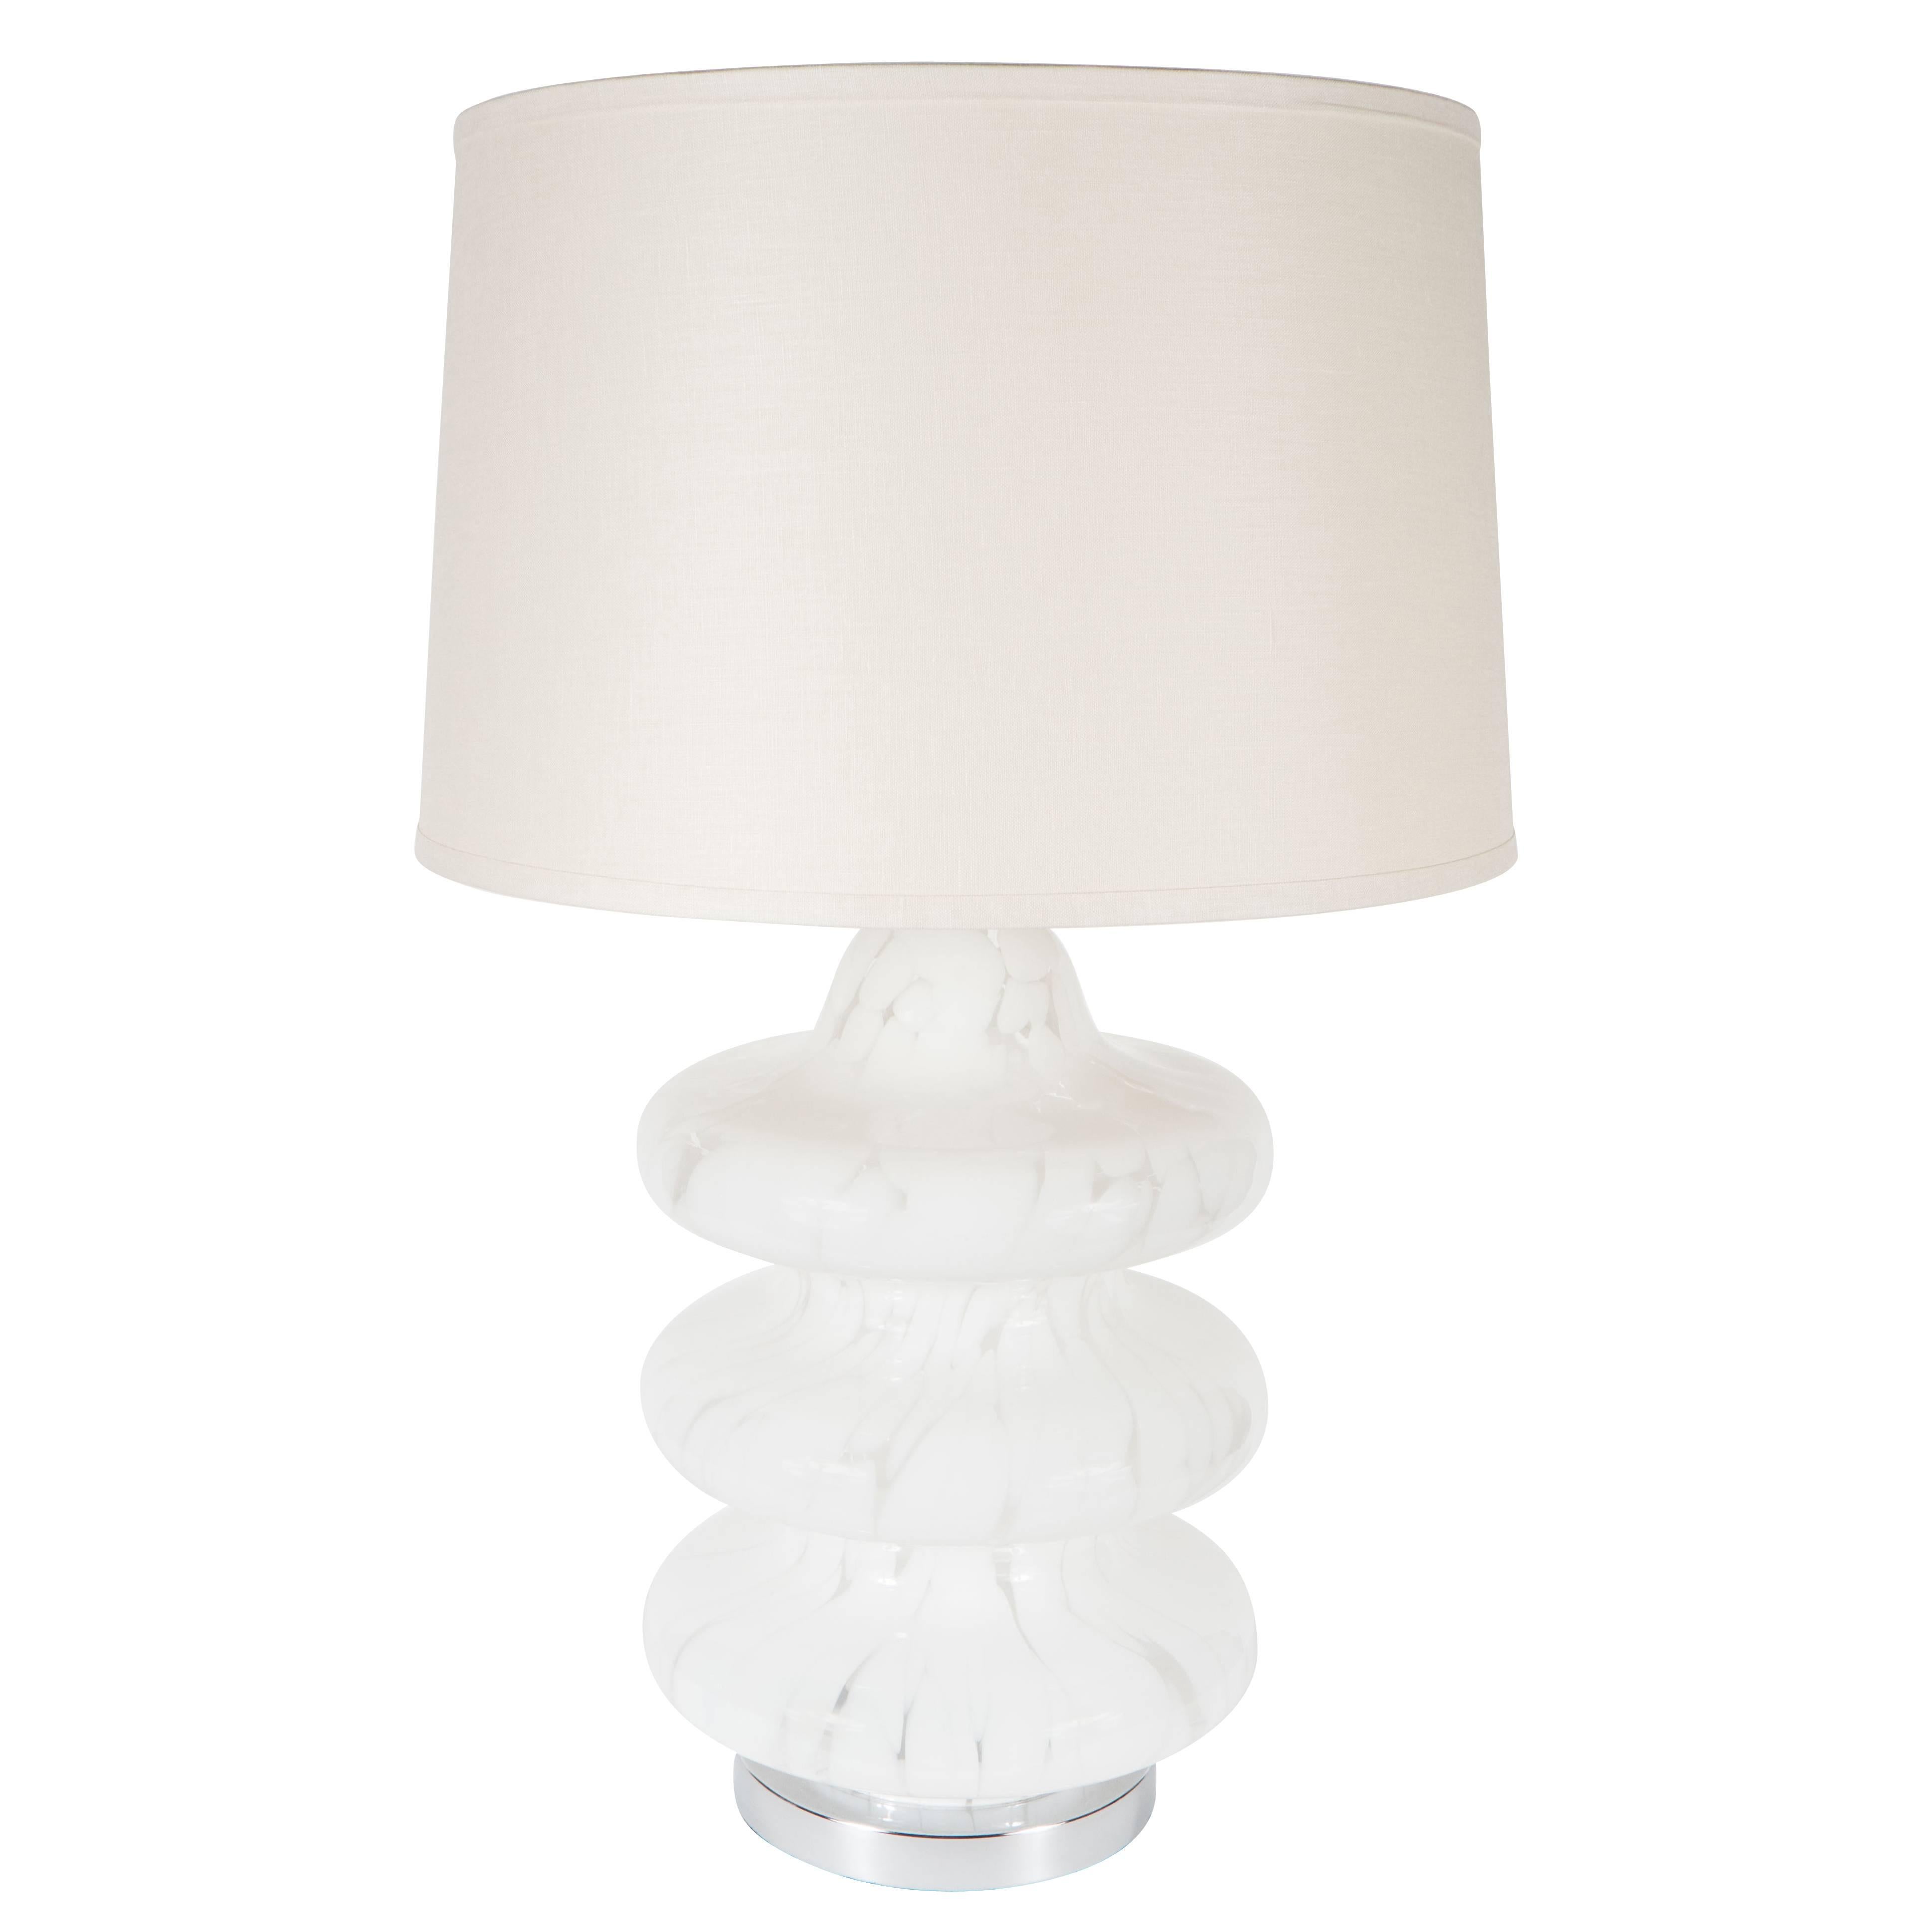 Mid-Century Mottled Frosted and Satin Murano TOTEM Table Lamp by Vistosi